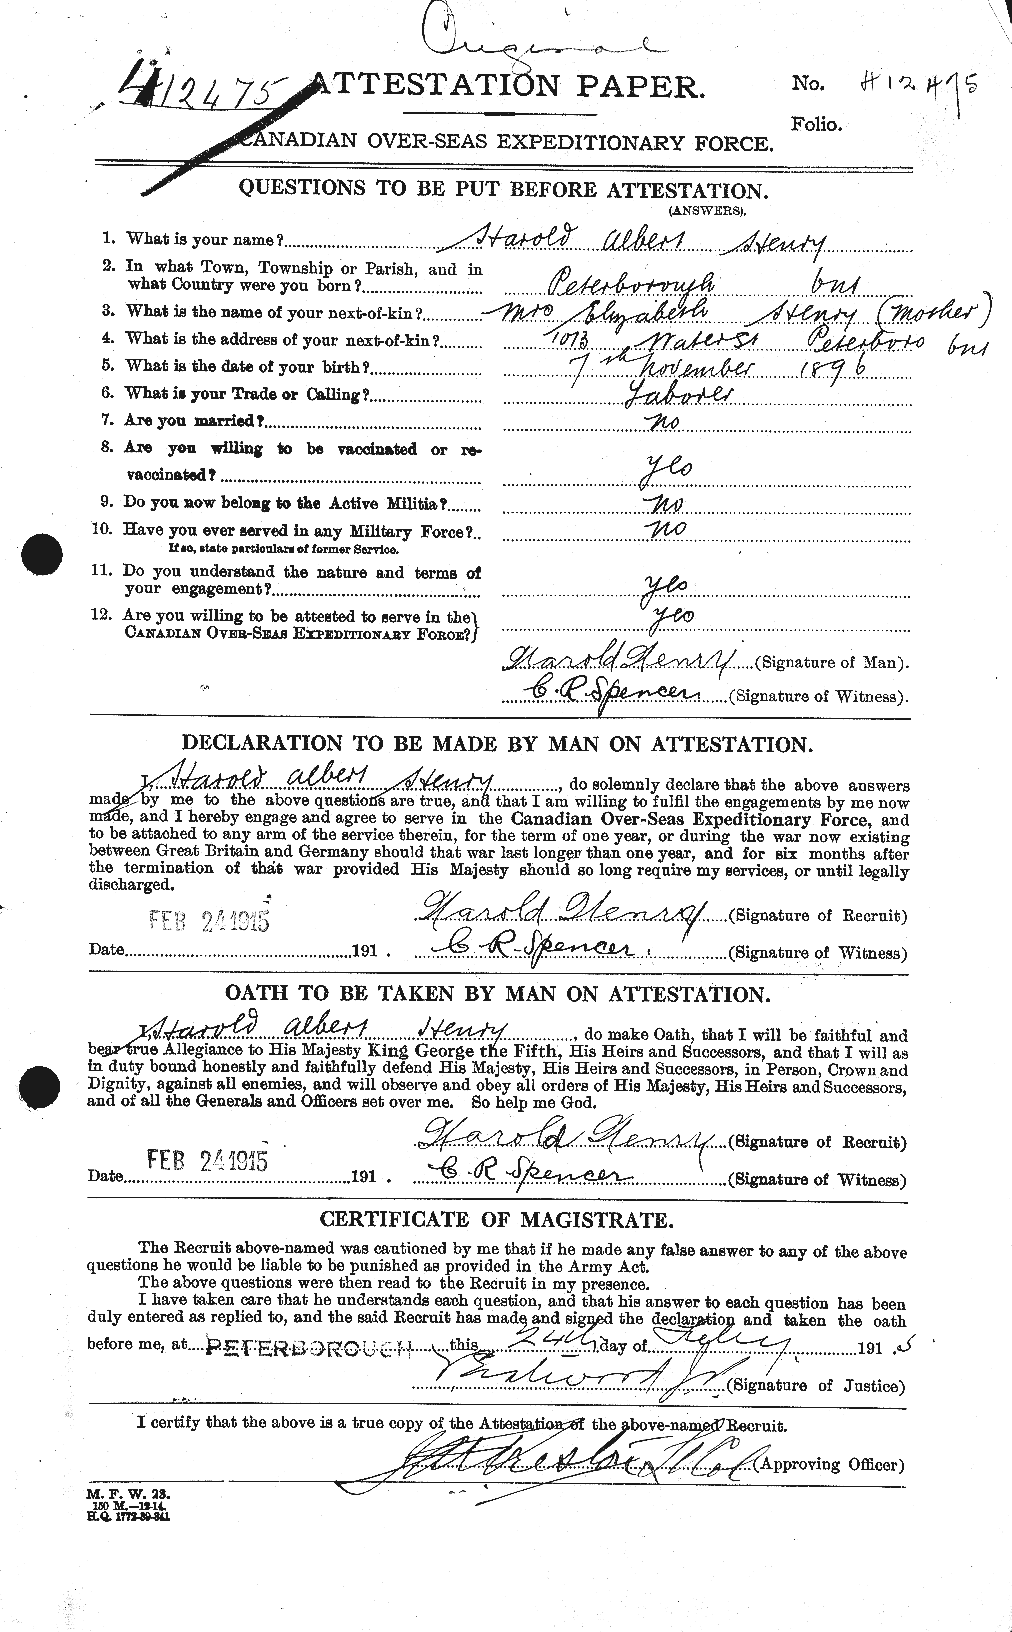 Personnel Records of the First World War - CEF 387565a